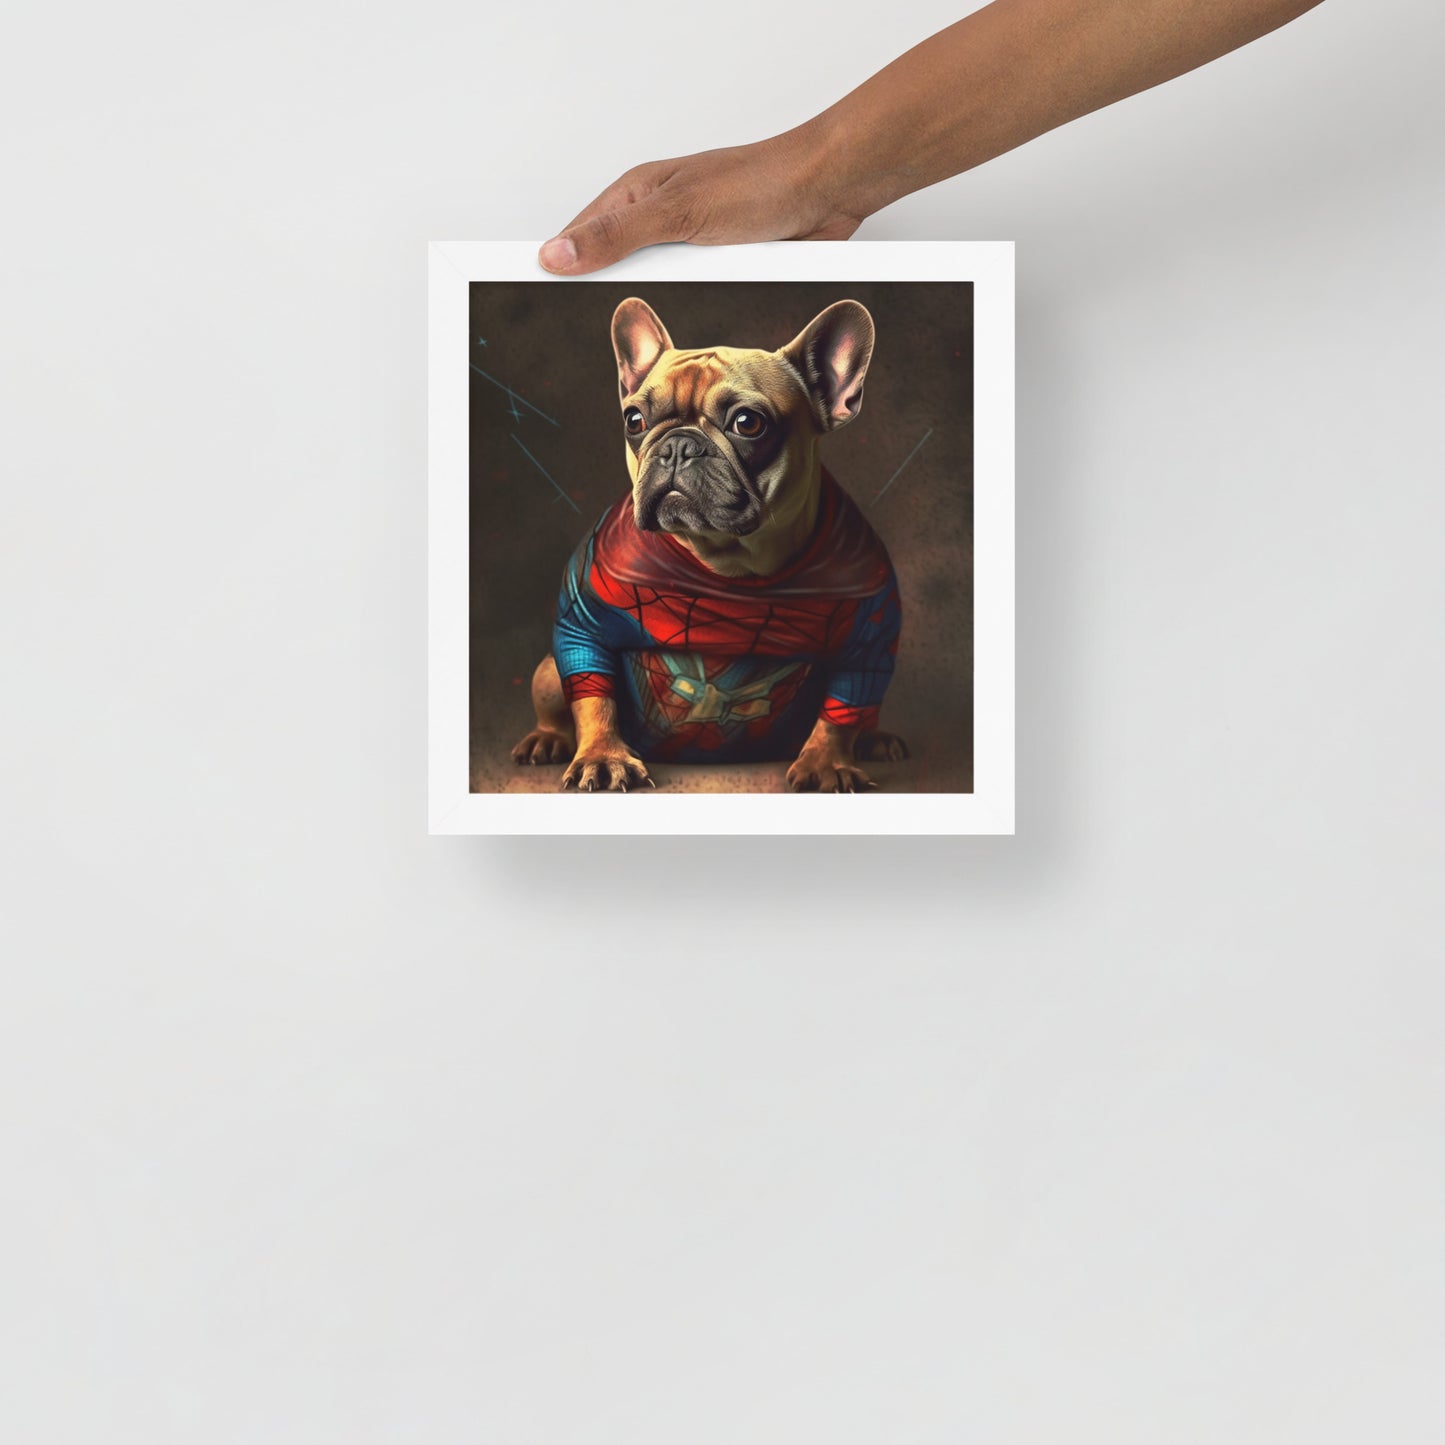 Charming Frenchie Portrait - Distinctive Framed Wall Art Poster